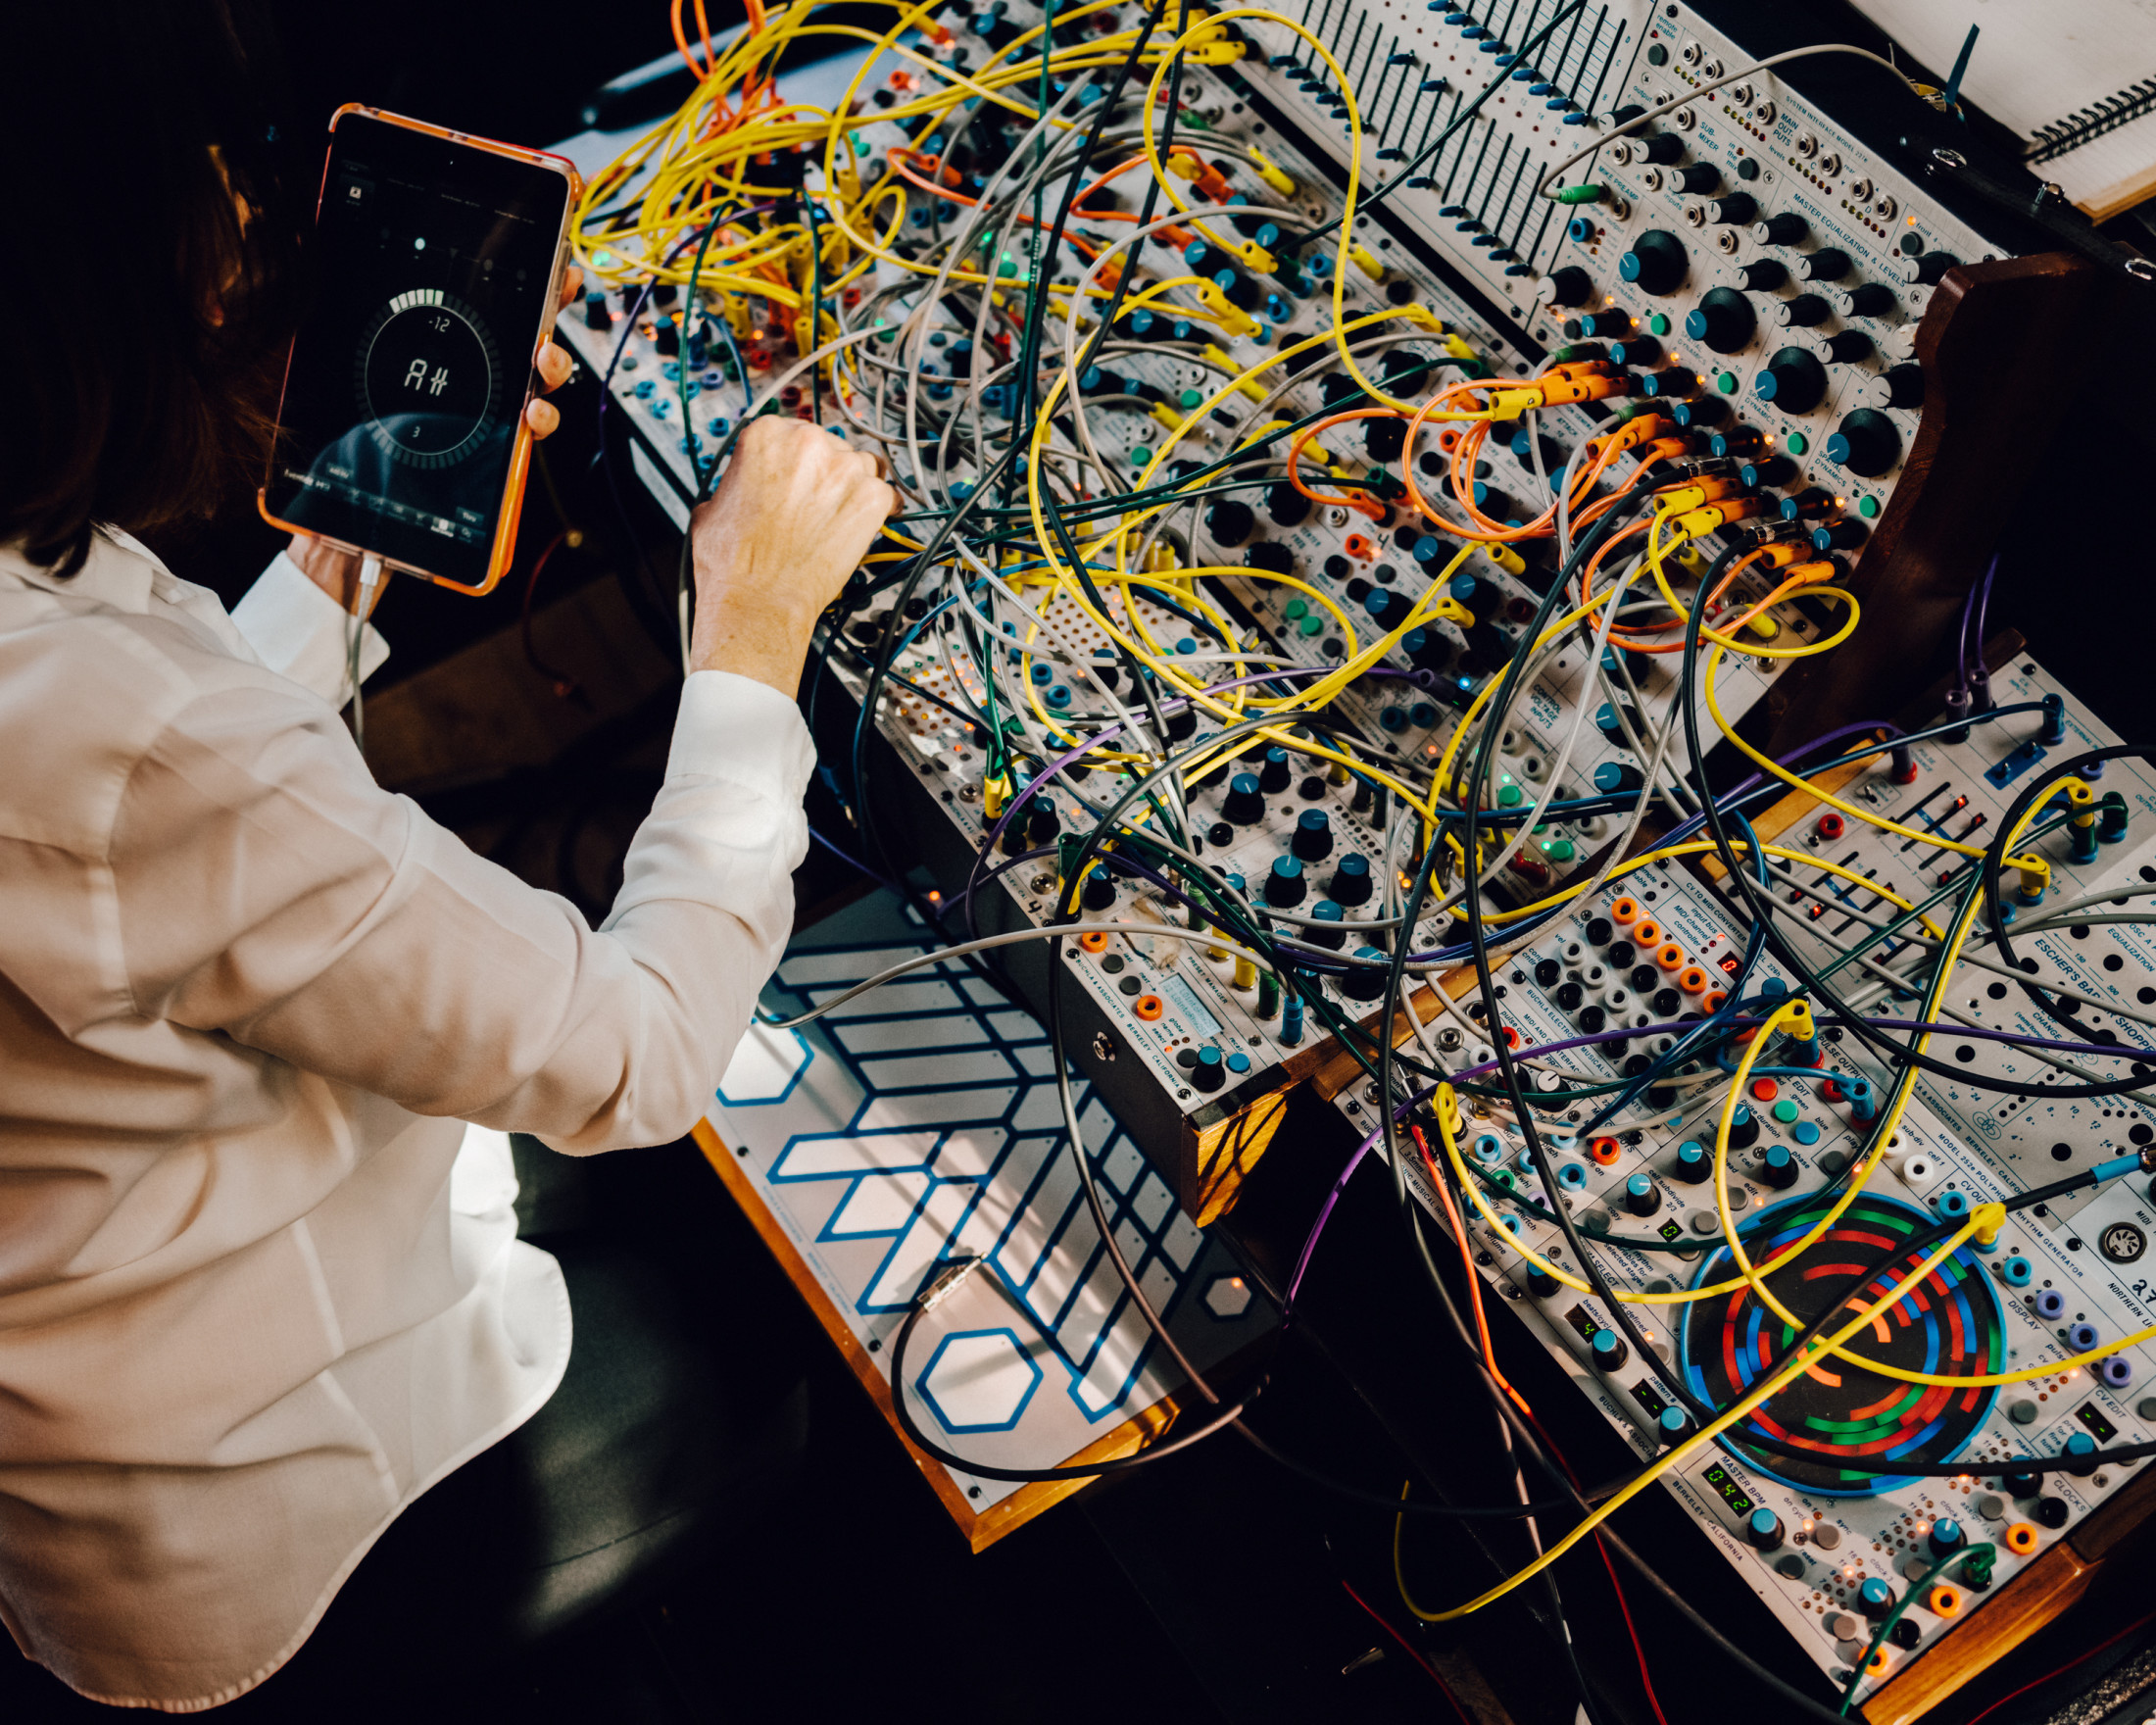 Suzanne with her Buchla. Image from The Caret.